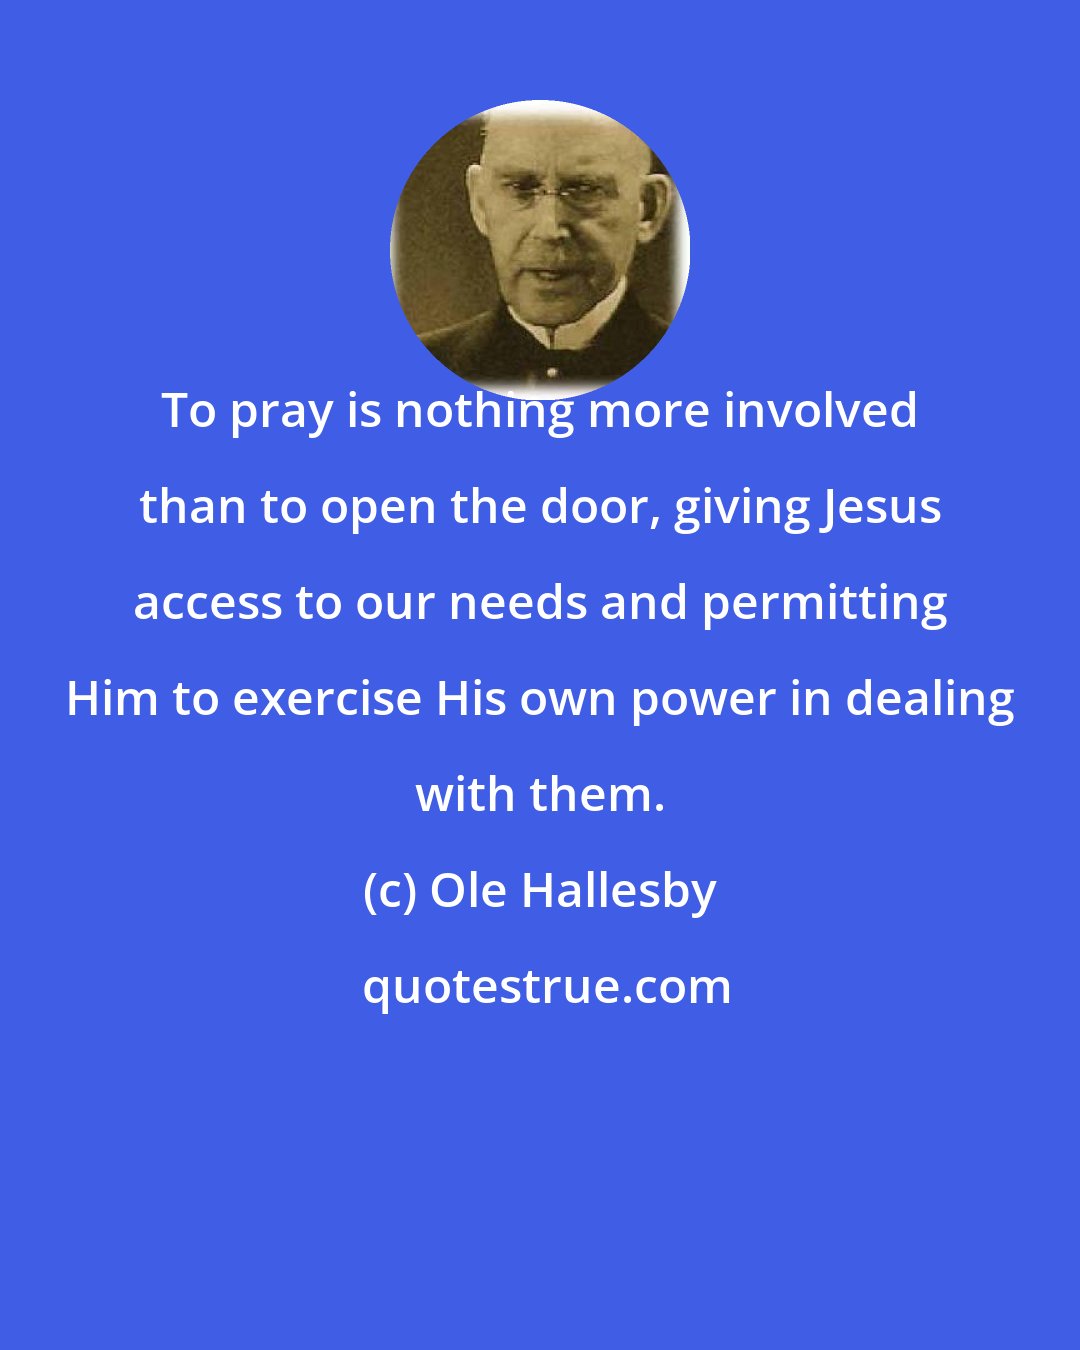 Ole Hallesby: To pray is nothing more involved than to open the door, giving Jesus access to our needs and permitting Him to exercise His own power in dealing with them.